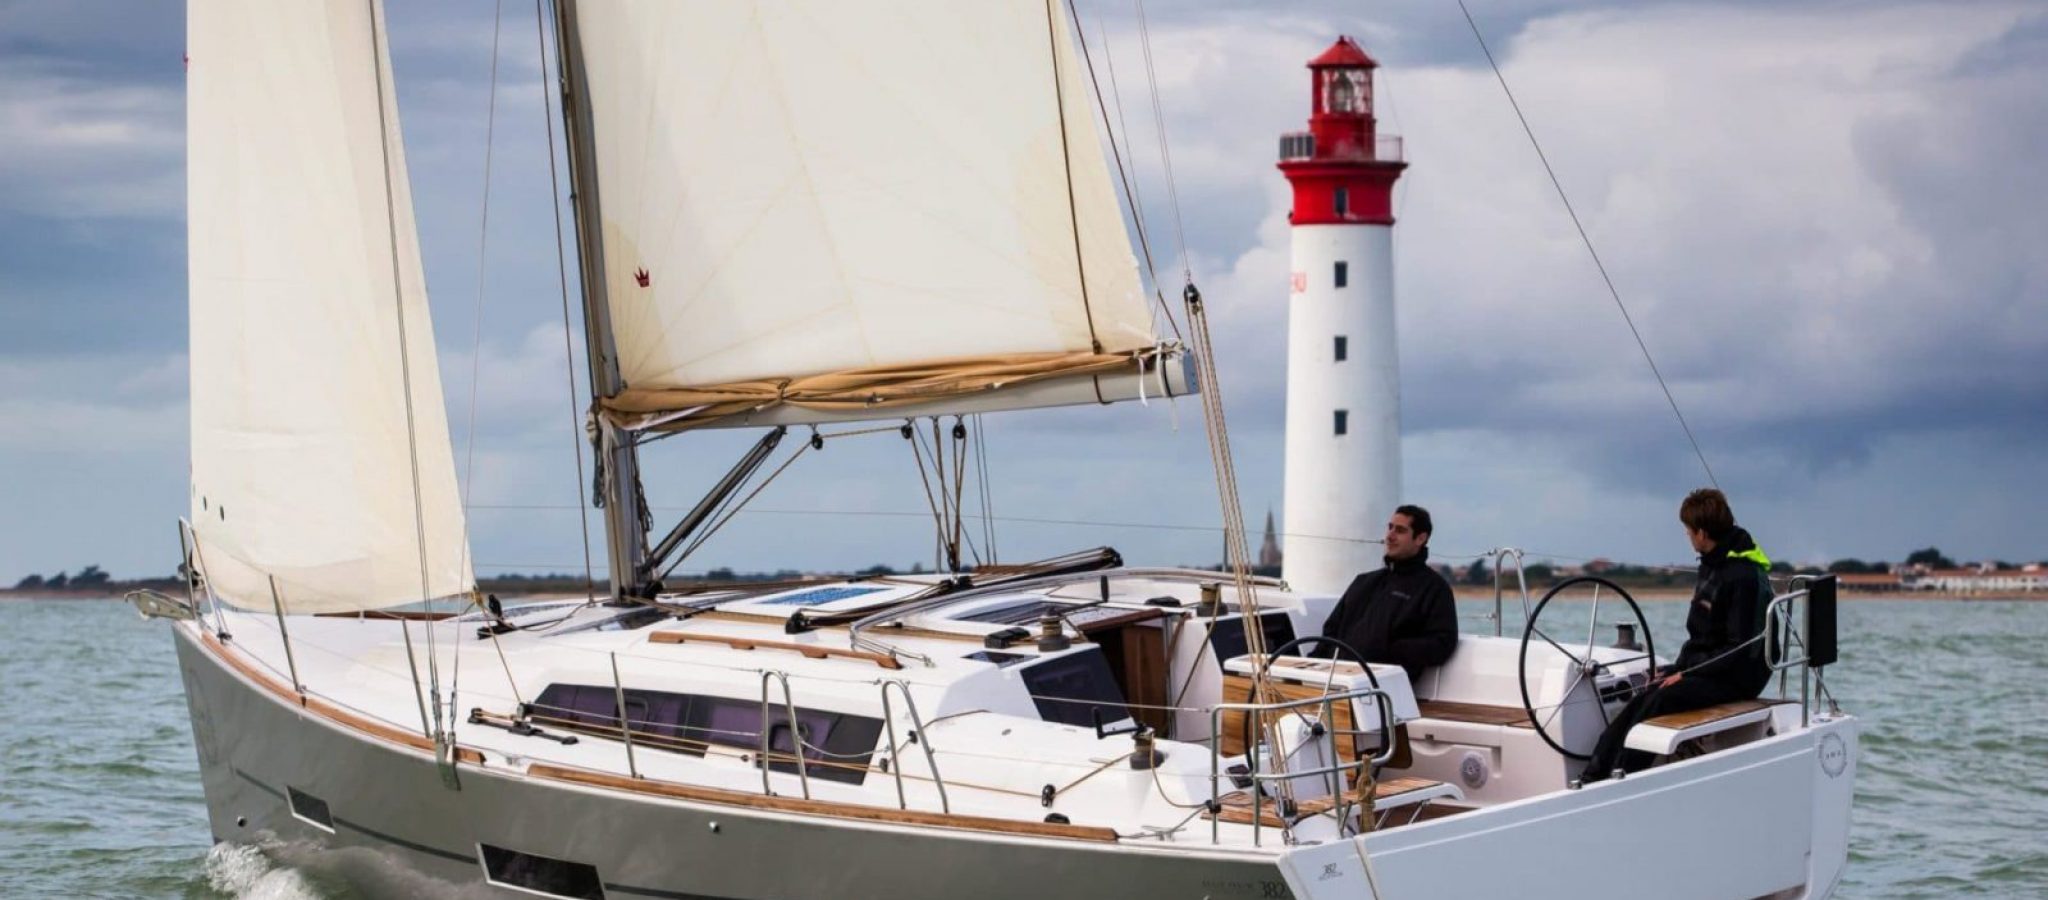 La Rochelle, France, 18 October 2014
Dufour Yachts
The new Dufour 382
Ph: Guido Cantini / Dufour/Sea&See.com